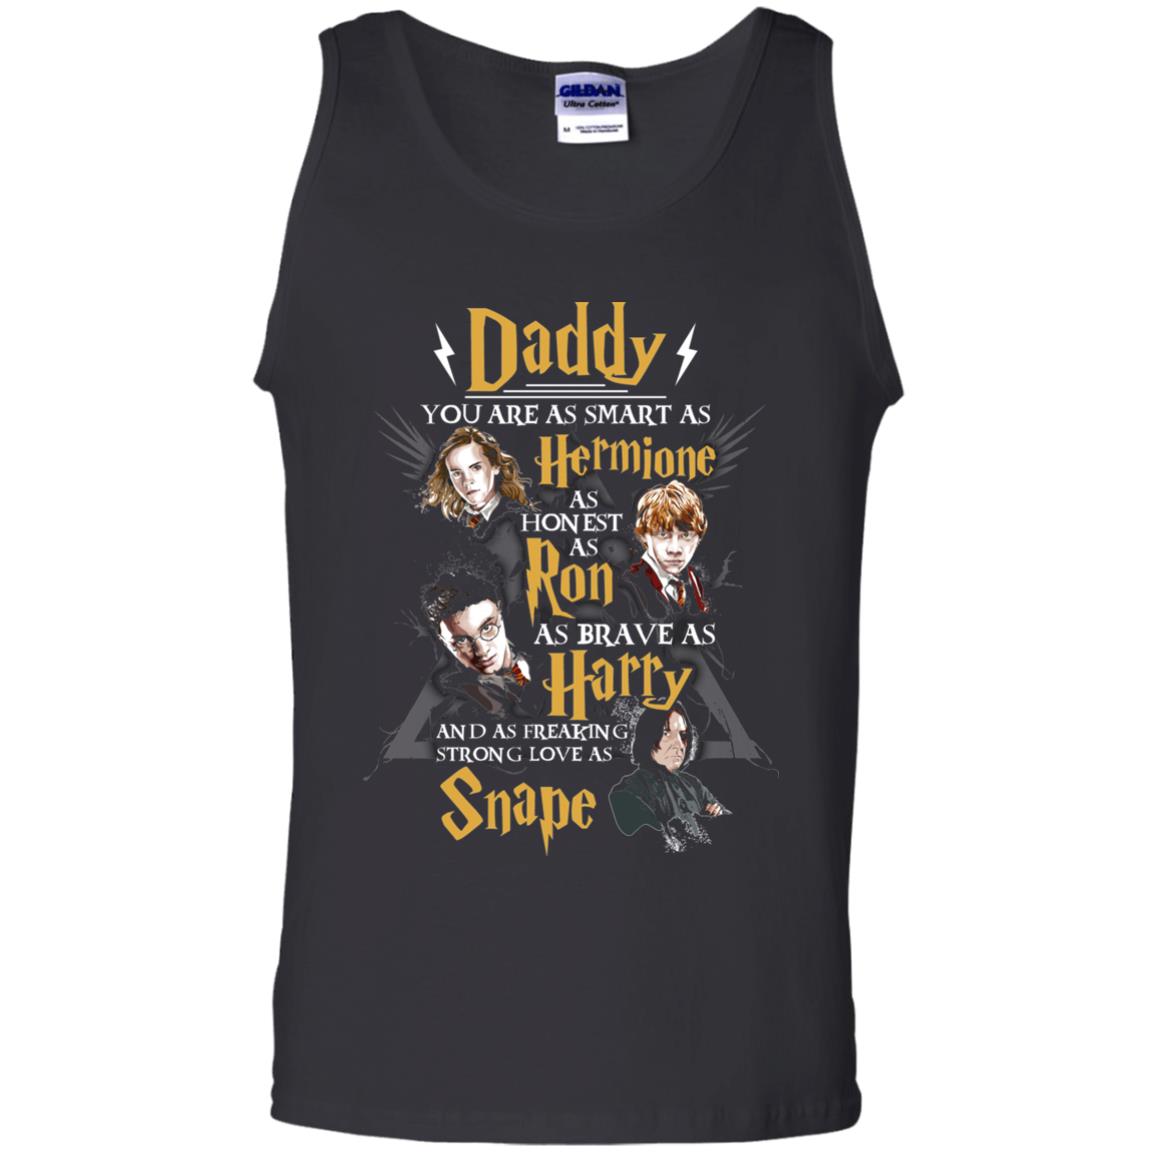 Daddy You Are As Smart As Hermione As Honest As Ron As Brave As Harry Harry Potter Fan T-shirtG220 Gildan 100% Cotton Tank Top